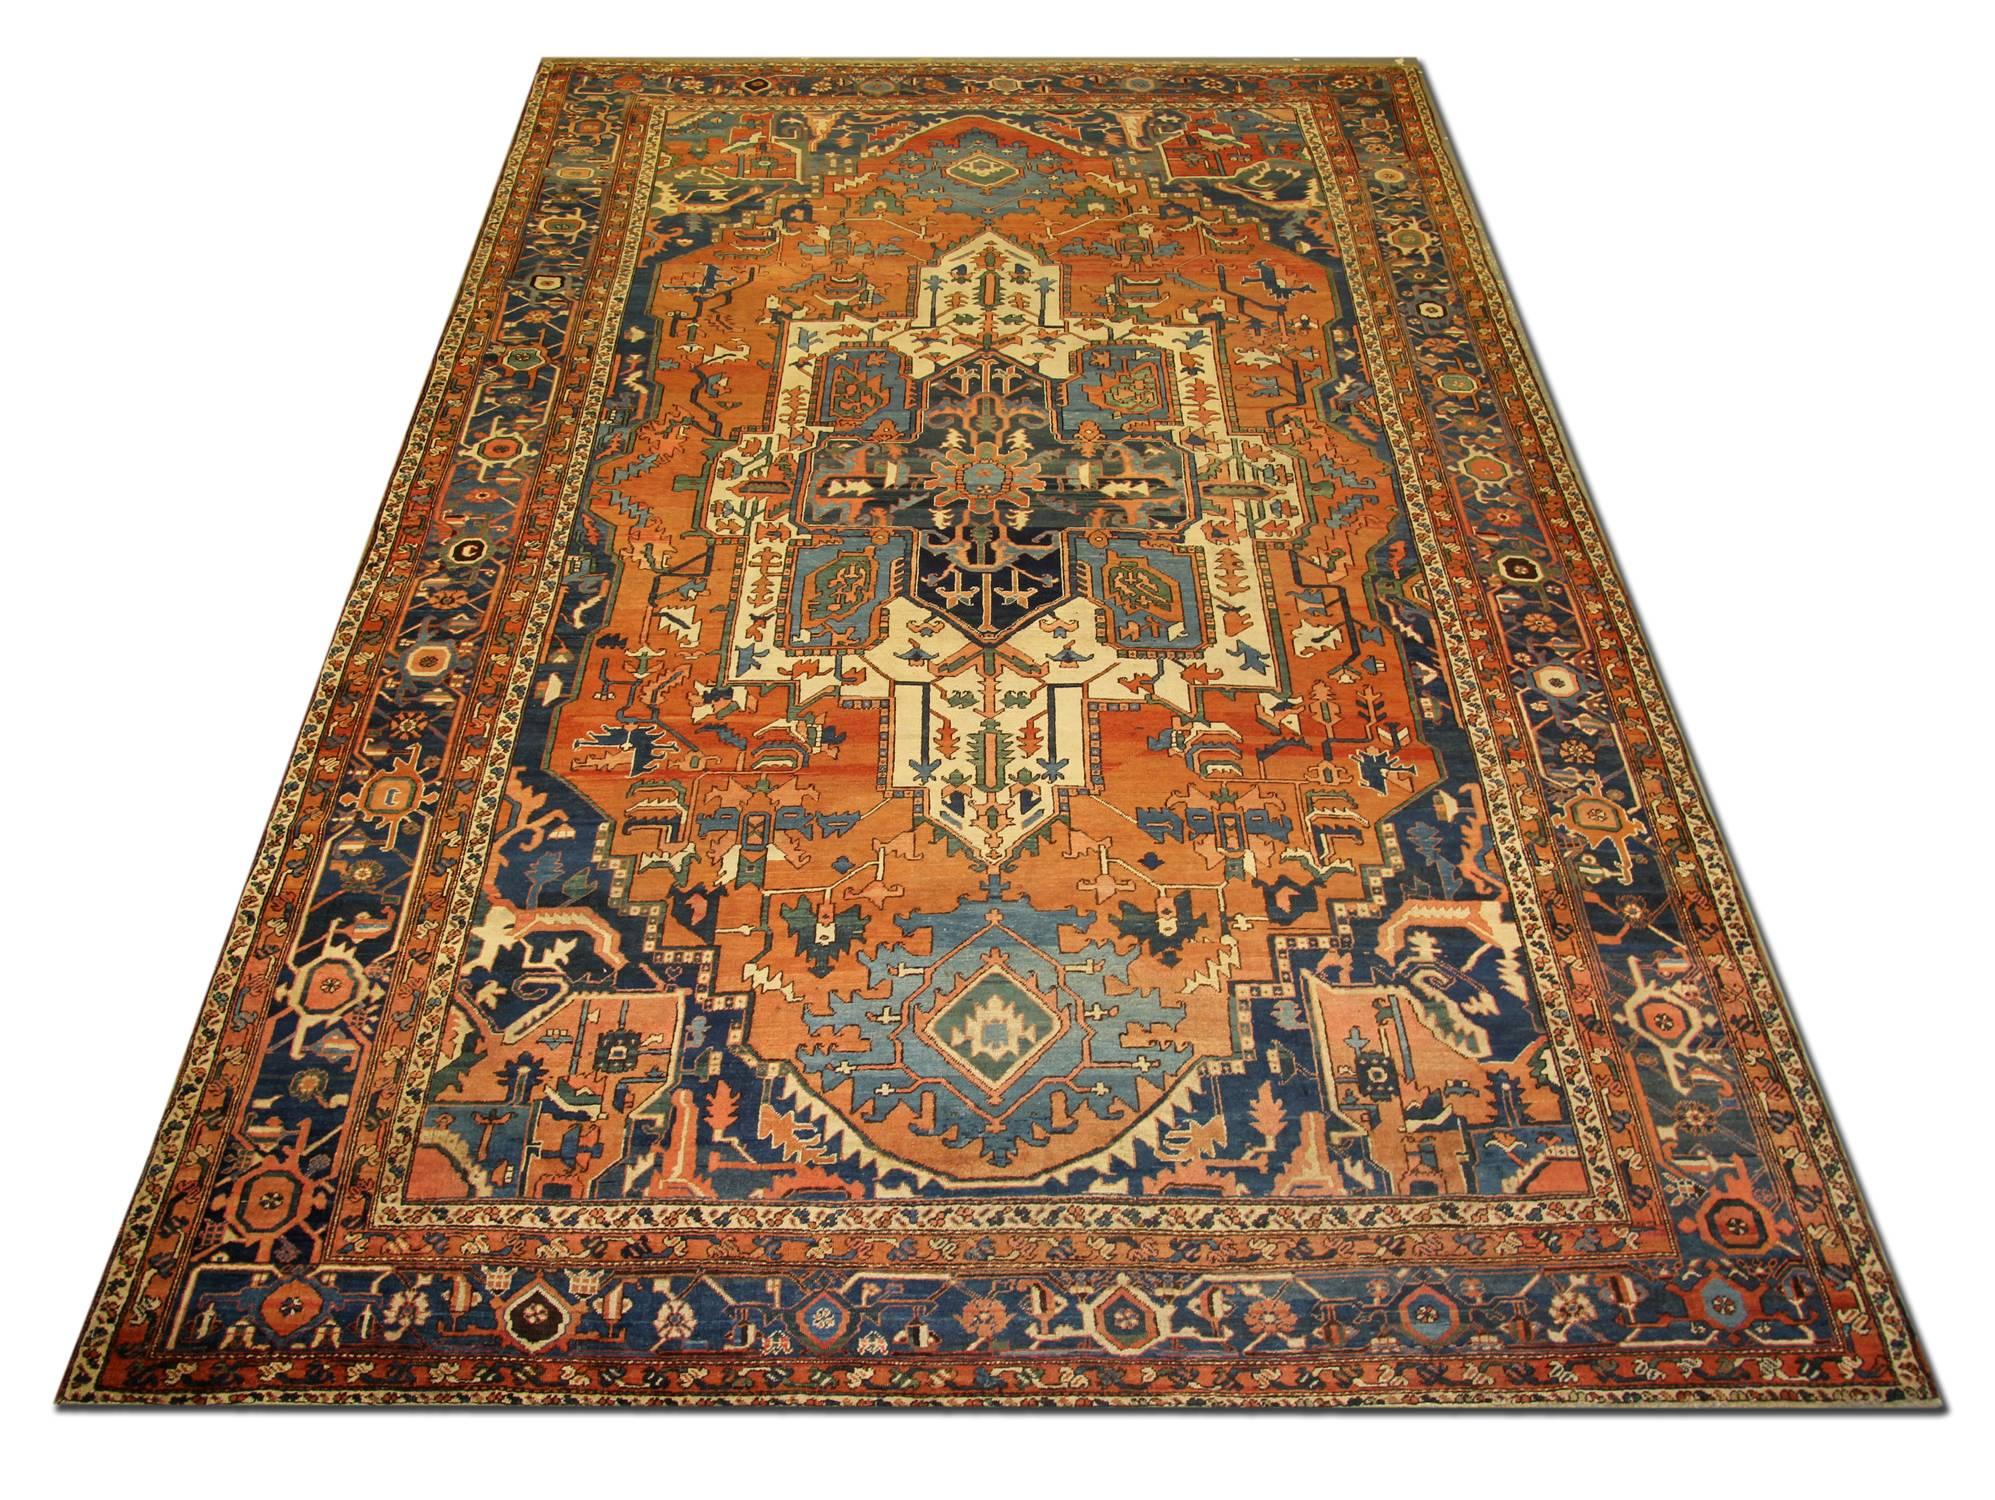 This stylish Serapi carpet rug paints a classic Persian central medallion format with saturated contrasting colour. The dark indigo internal medallion on the Persian carpet inside the bigger ivory medallion paired with a leading border of the same